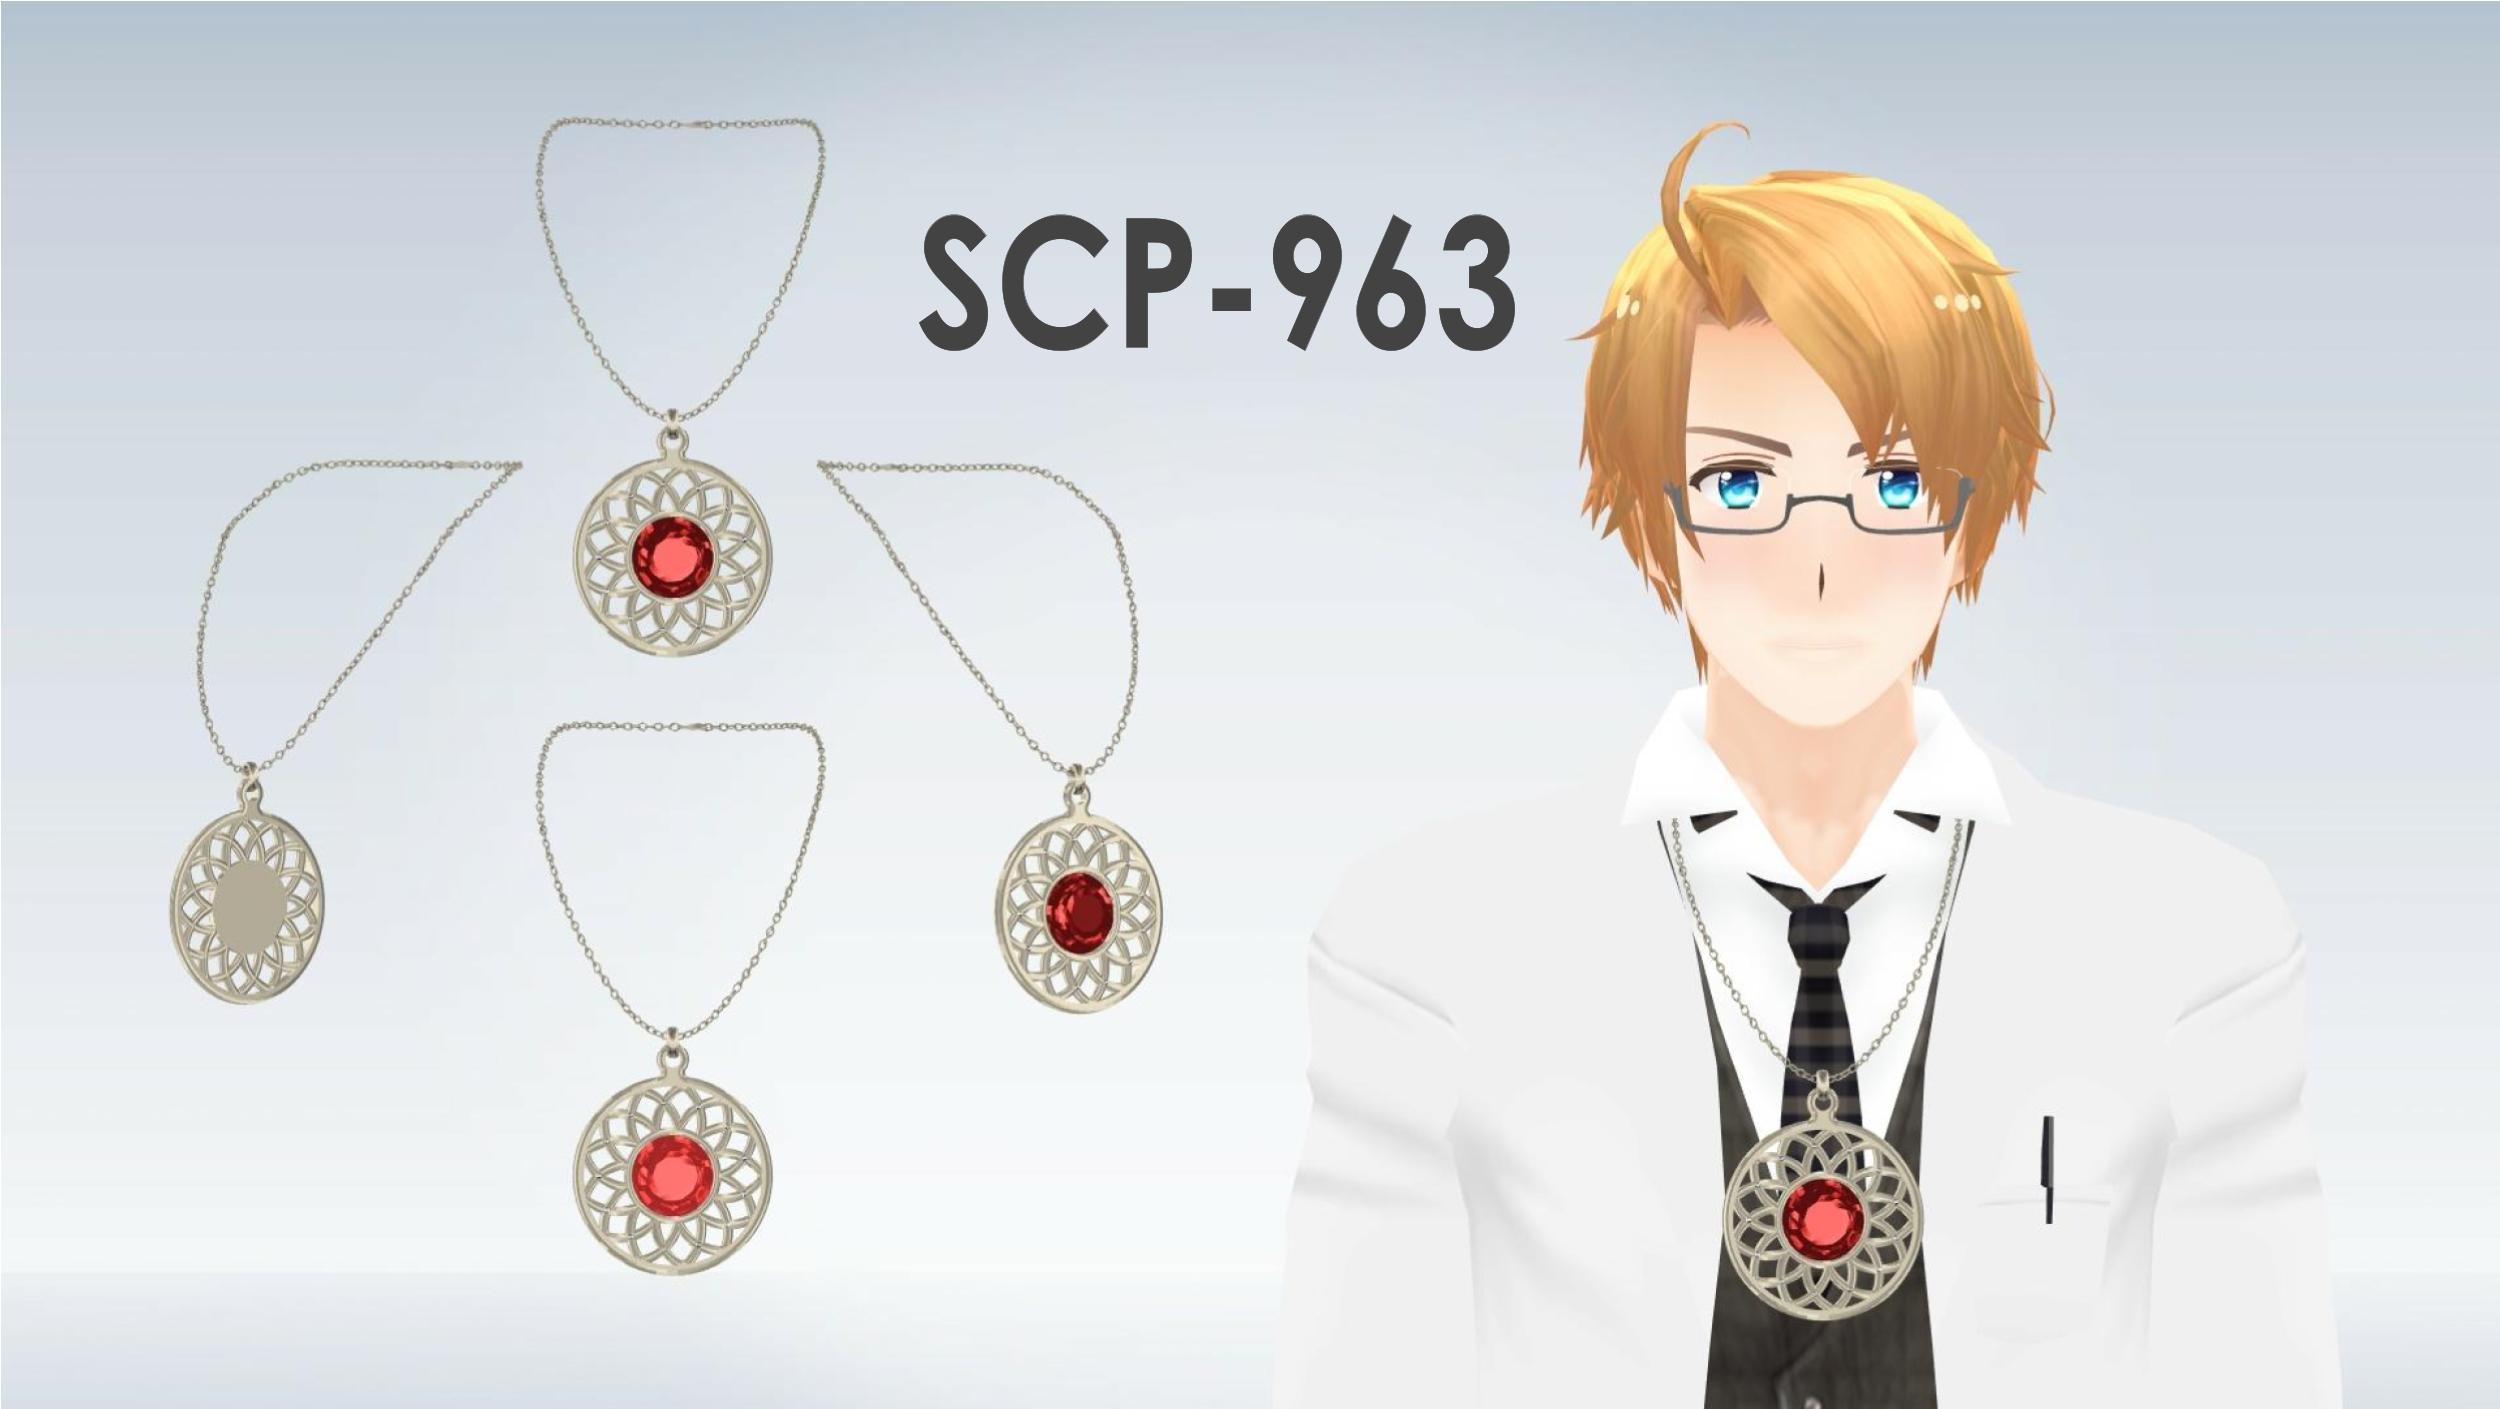 MMD] SCP-963 Necklace DL by 138446 on DeviantArt